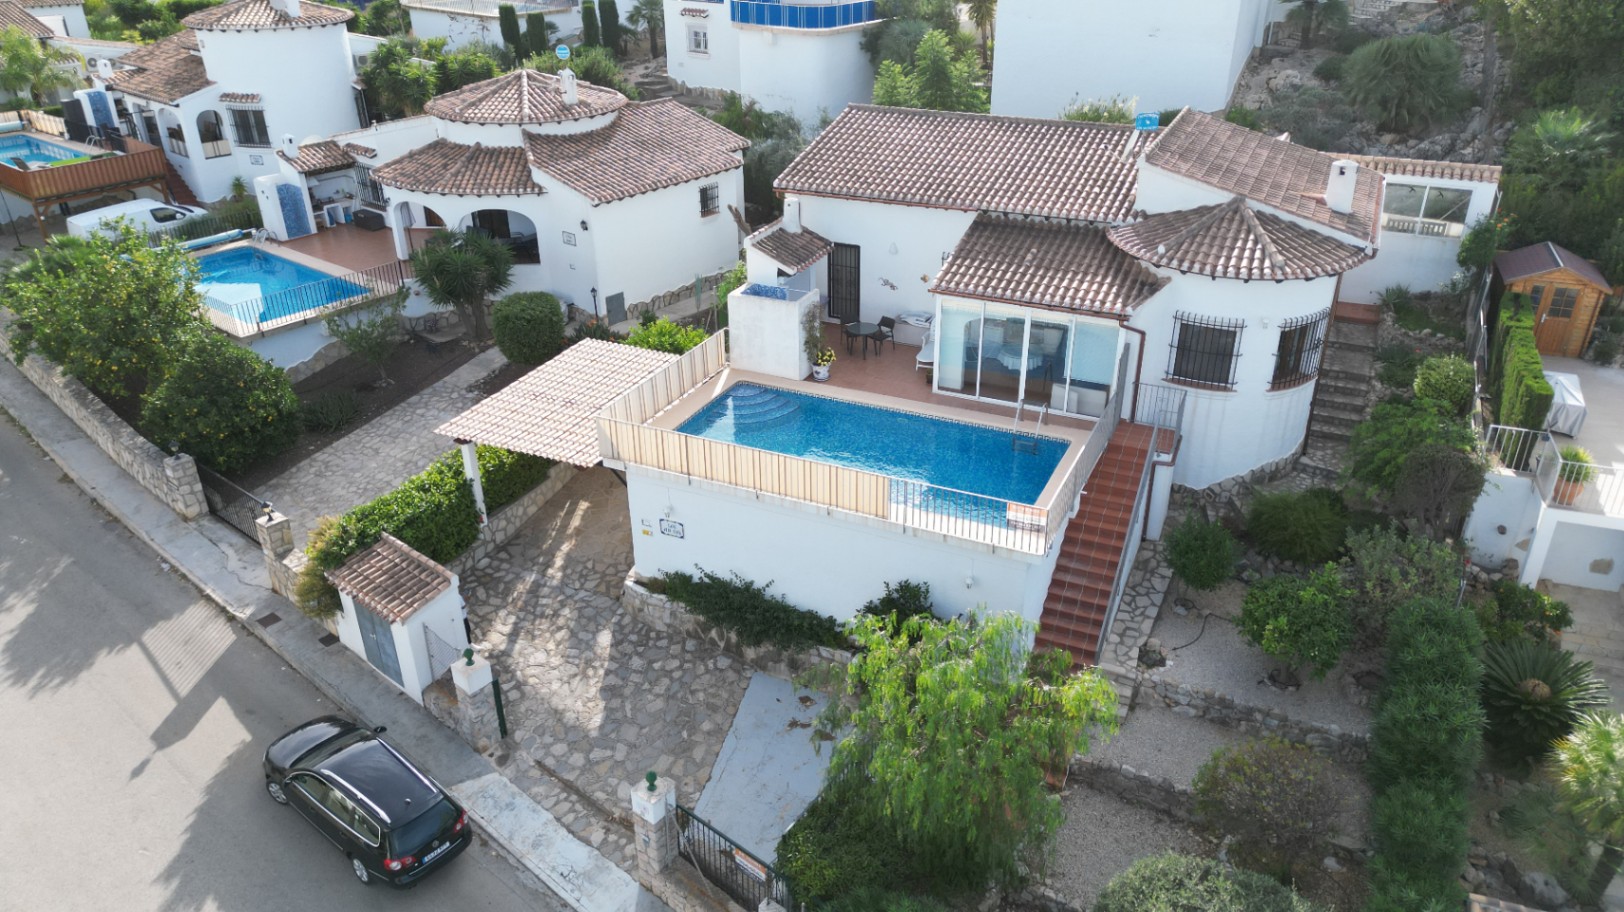 Beautiful 2 bedroom villa with sea views, swimming pool, central heating, carport, and much more.